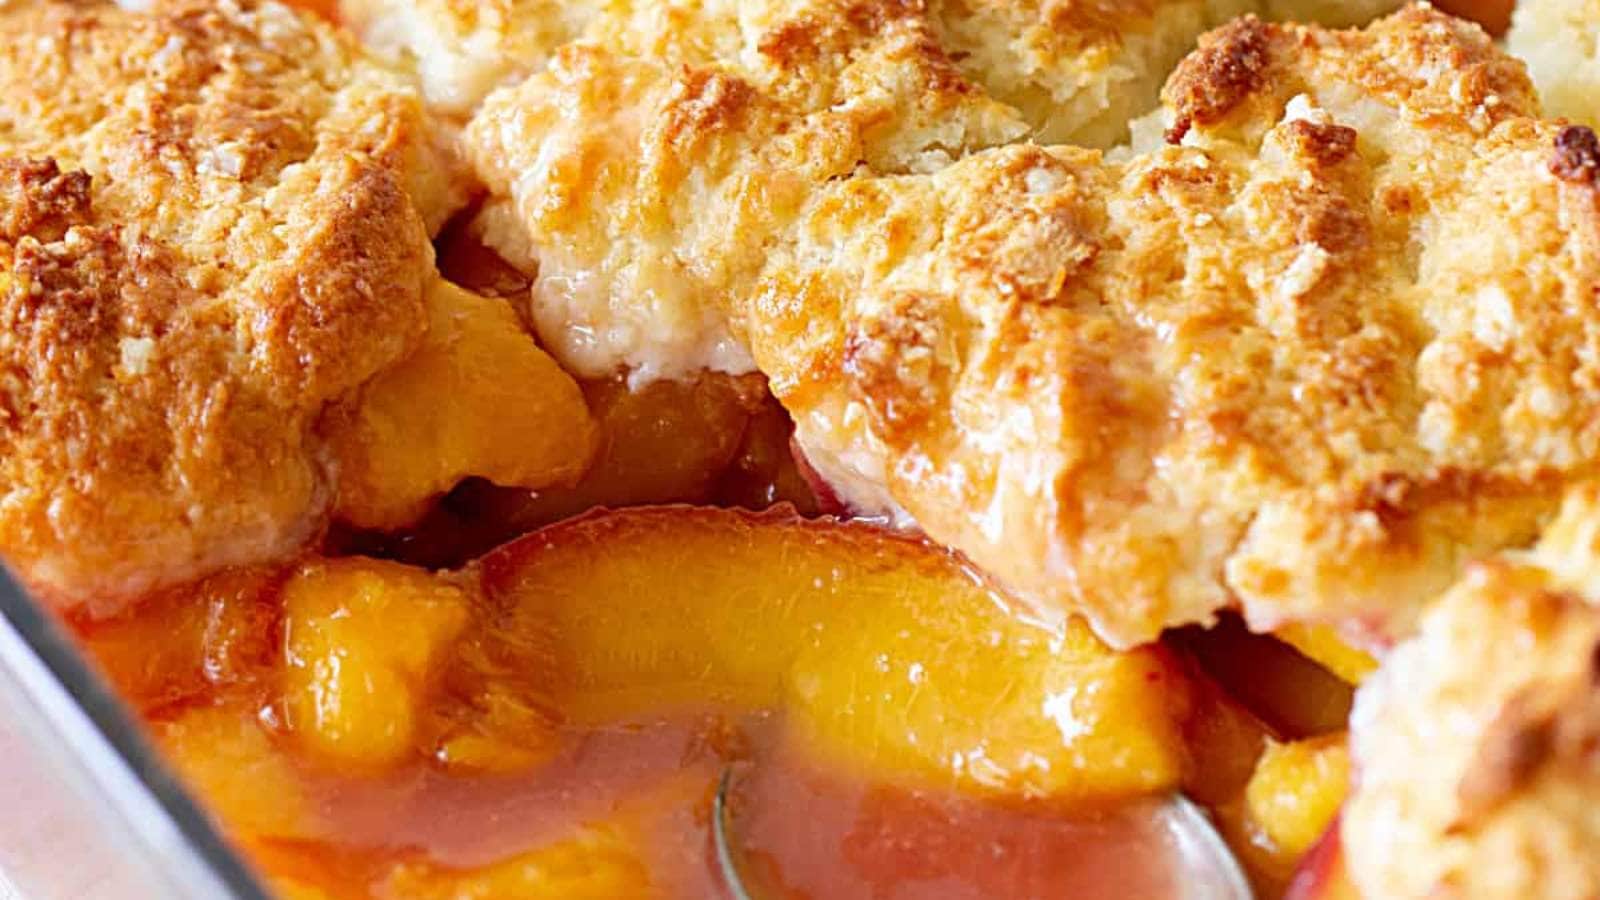 Old Fashioned Peach Cobbler recipe by Vintage Kitchen.